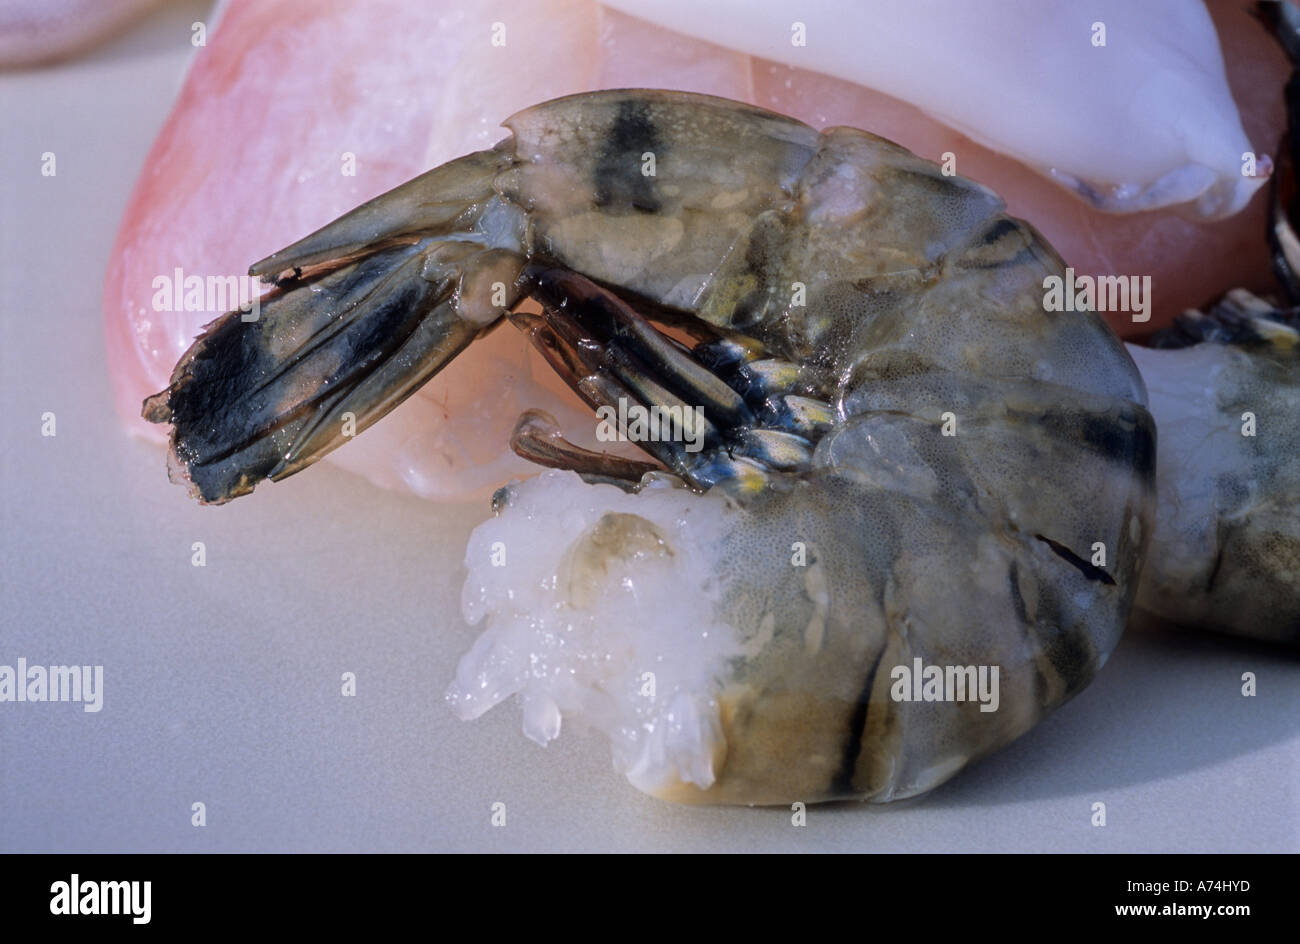 UNCOOKED PRAWN CUTTLE FISH Stock Photo